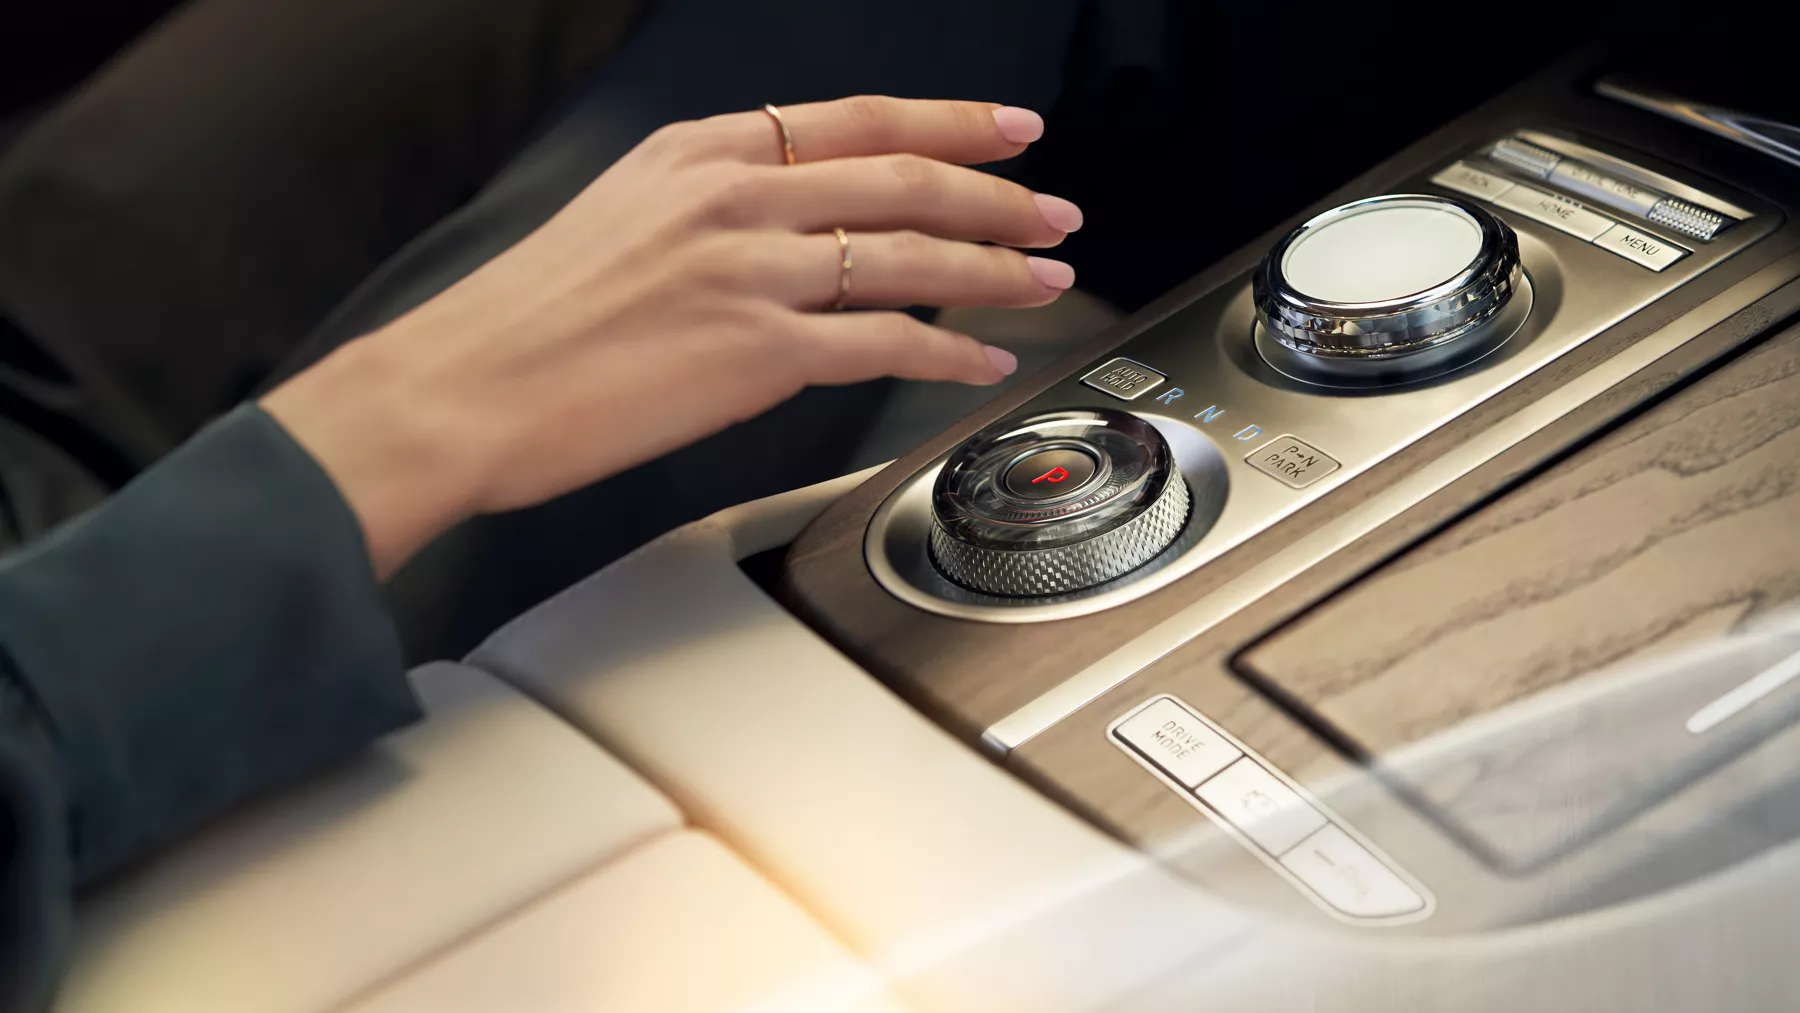 Human hand adjusting dial on G80 center console.